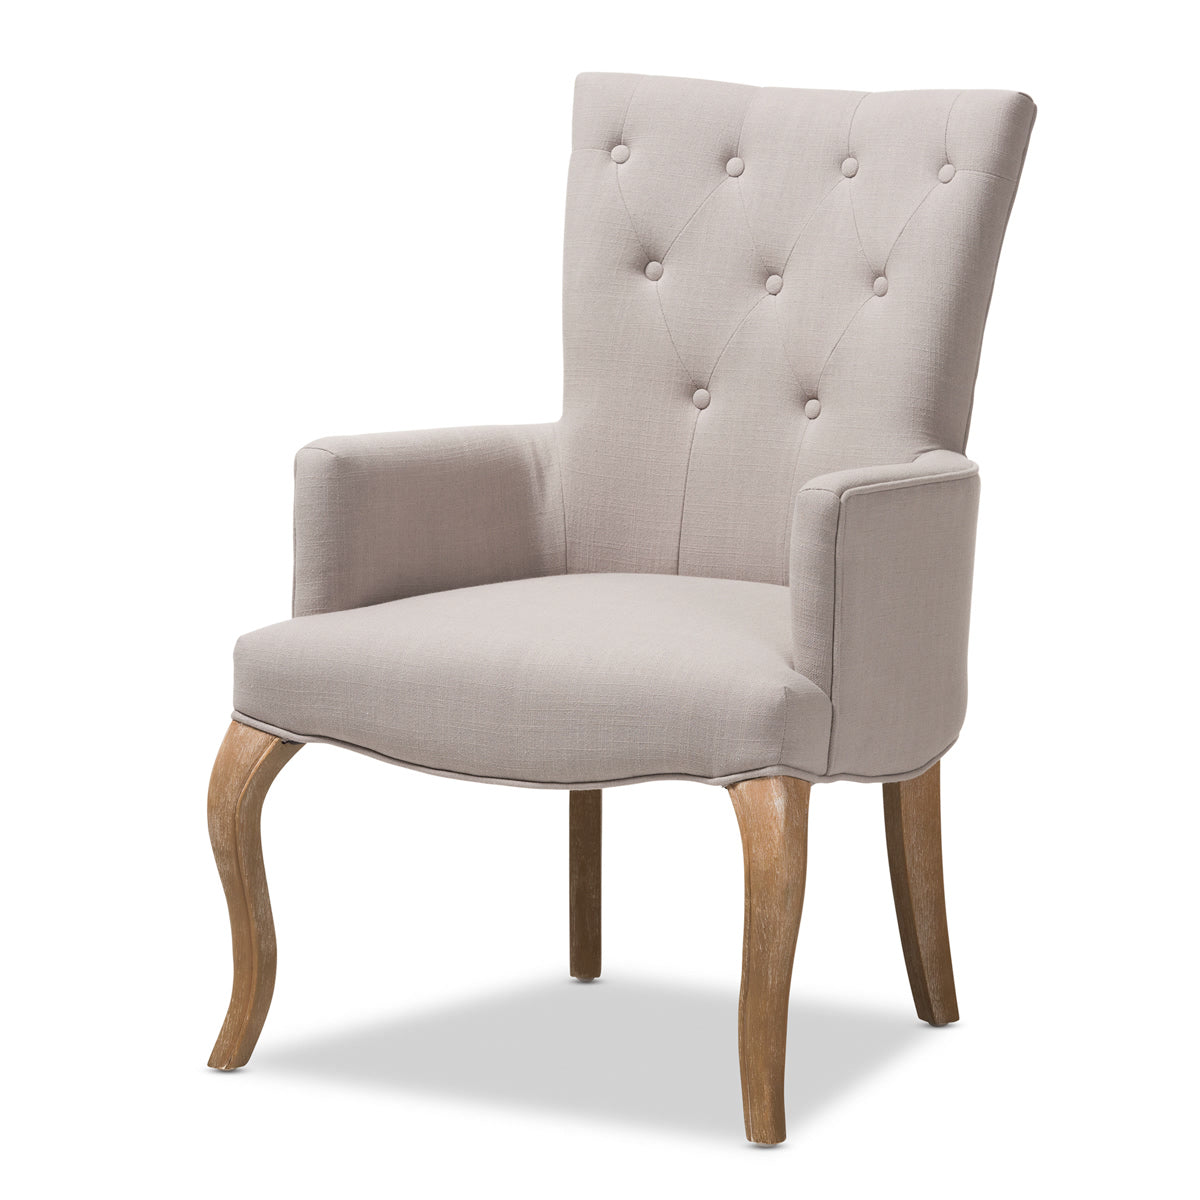 Baxton Studio Clotille French Provincial Beige Fabric Upholstered Whitewashed Oak Lounge Chair Baxton Studio-chairs-Minimal And Modern - 1